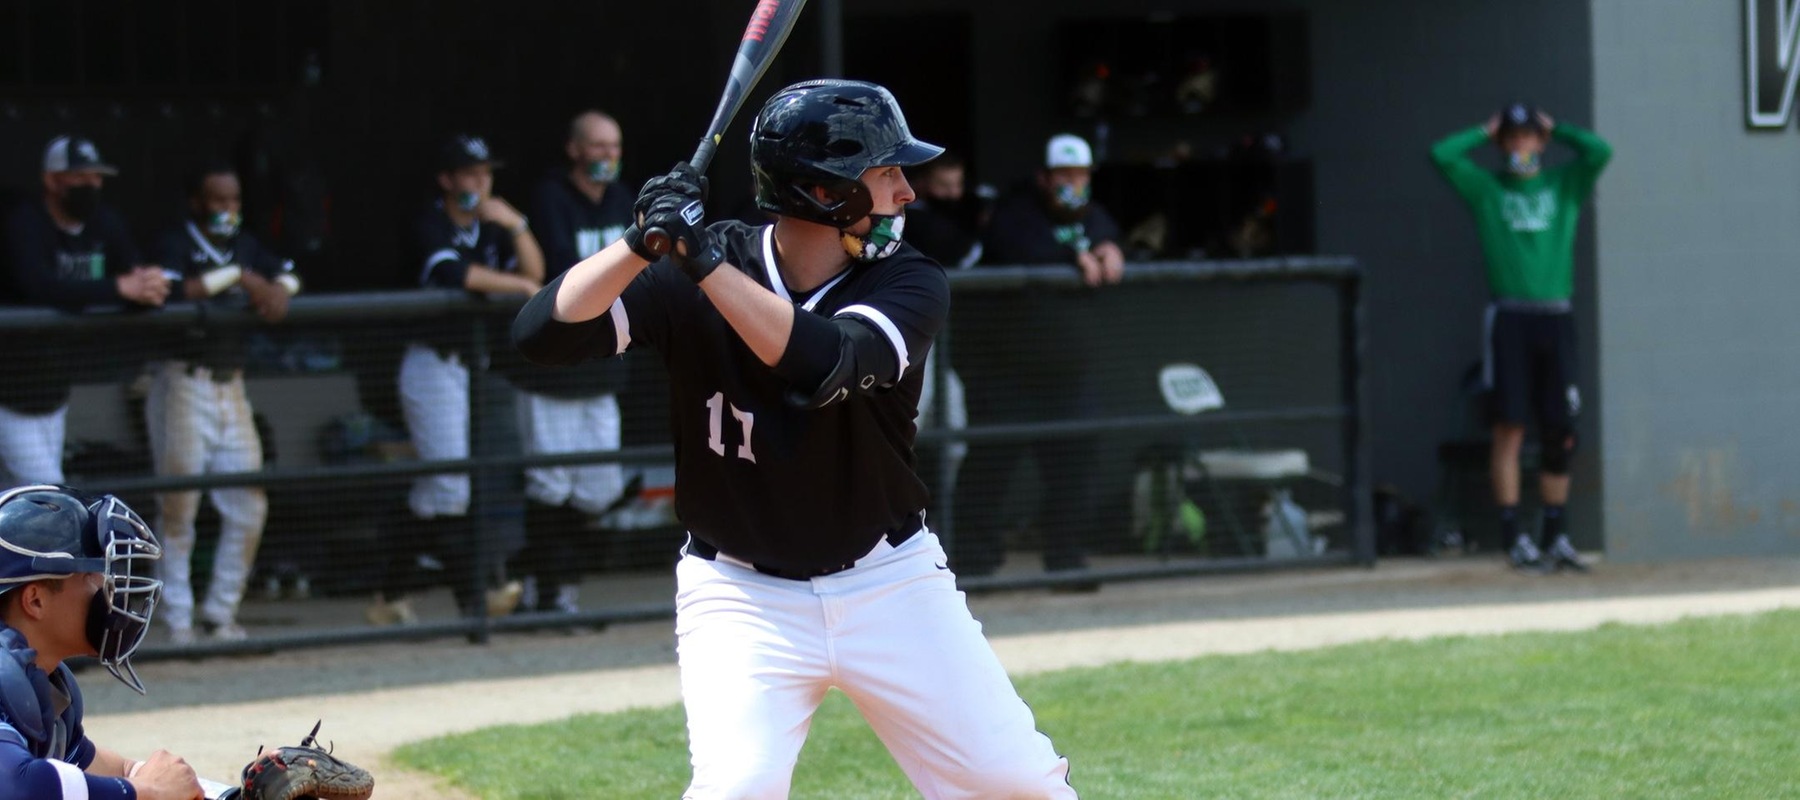 File photo of Shaut Haut who batted 3-for-3 with a double against Goldey-Beacom. Copyright 2021; Wilmington University. All rights reserved. Photo by Dan Lauletta. April 18, 2021 vs. Jefferson.